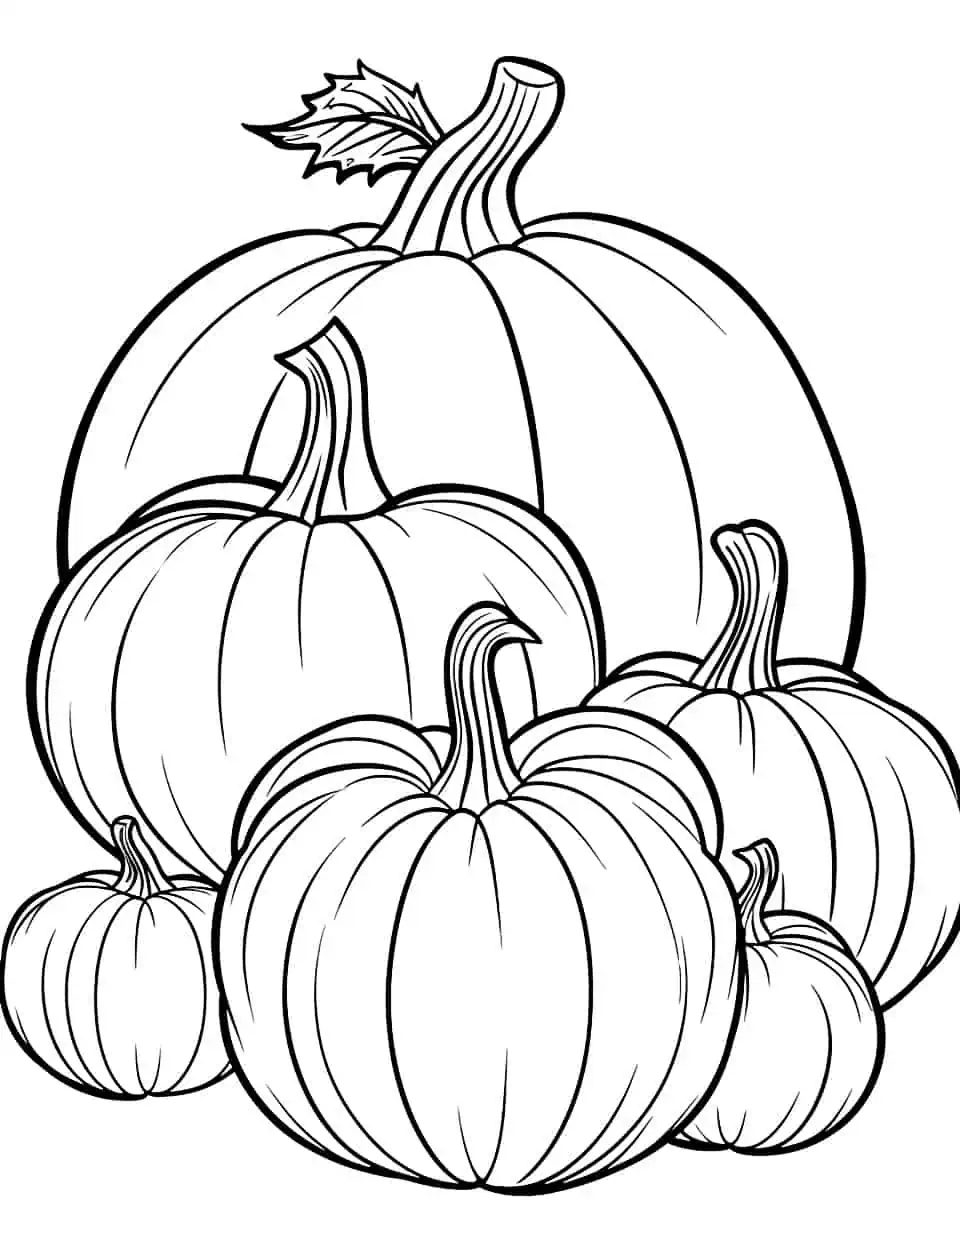 Small Pumpkin Bunch Coloring Page - A group of small pumpkins gathered together, showing the diversity of pumpkin sizes.